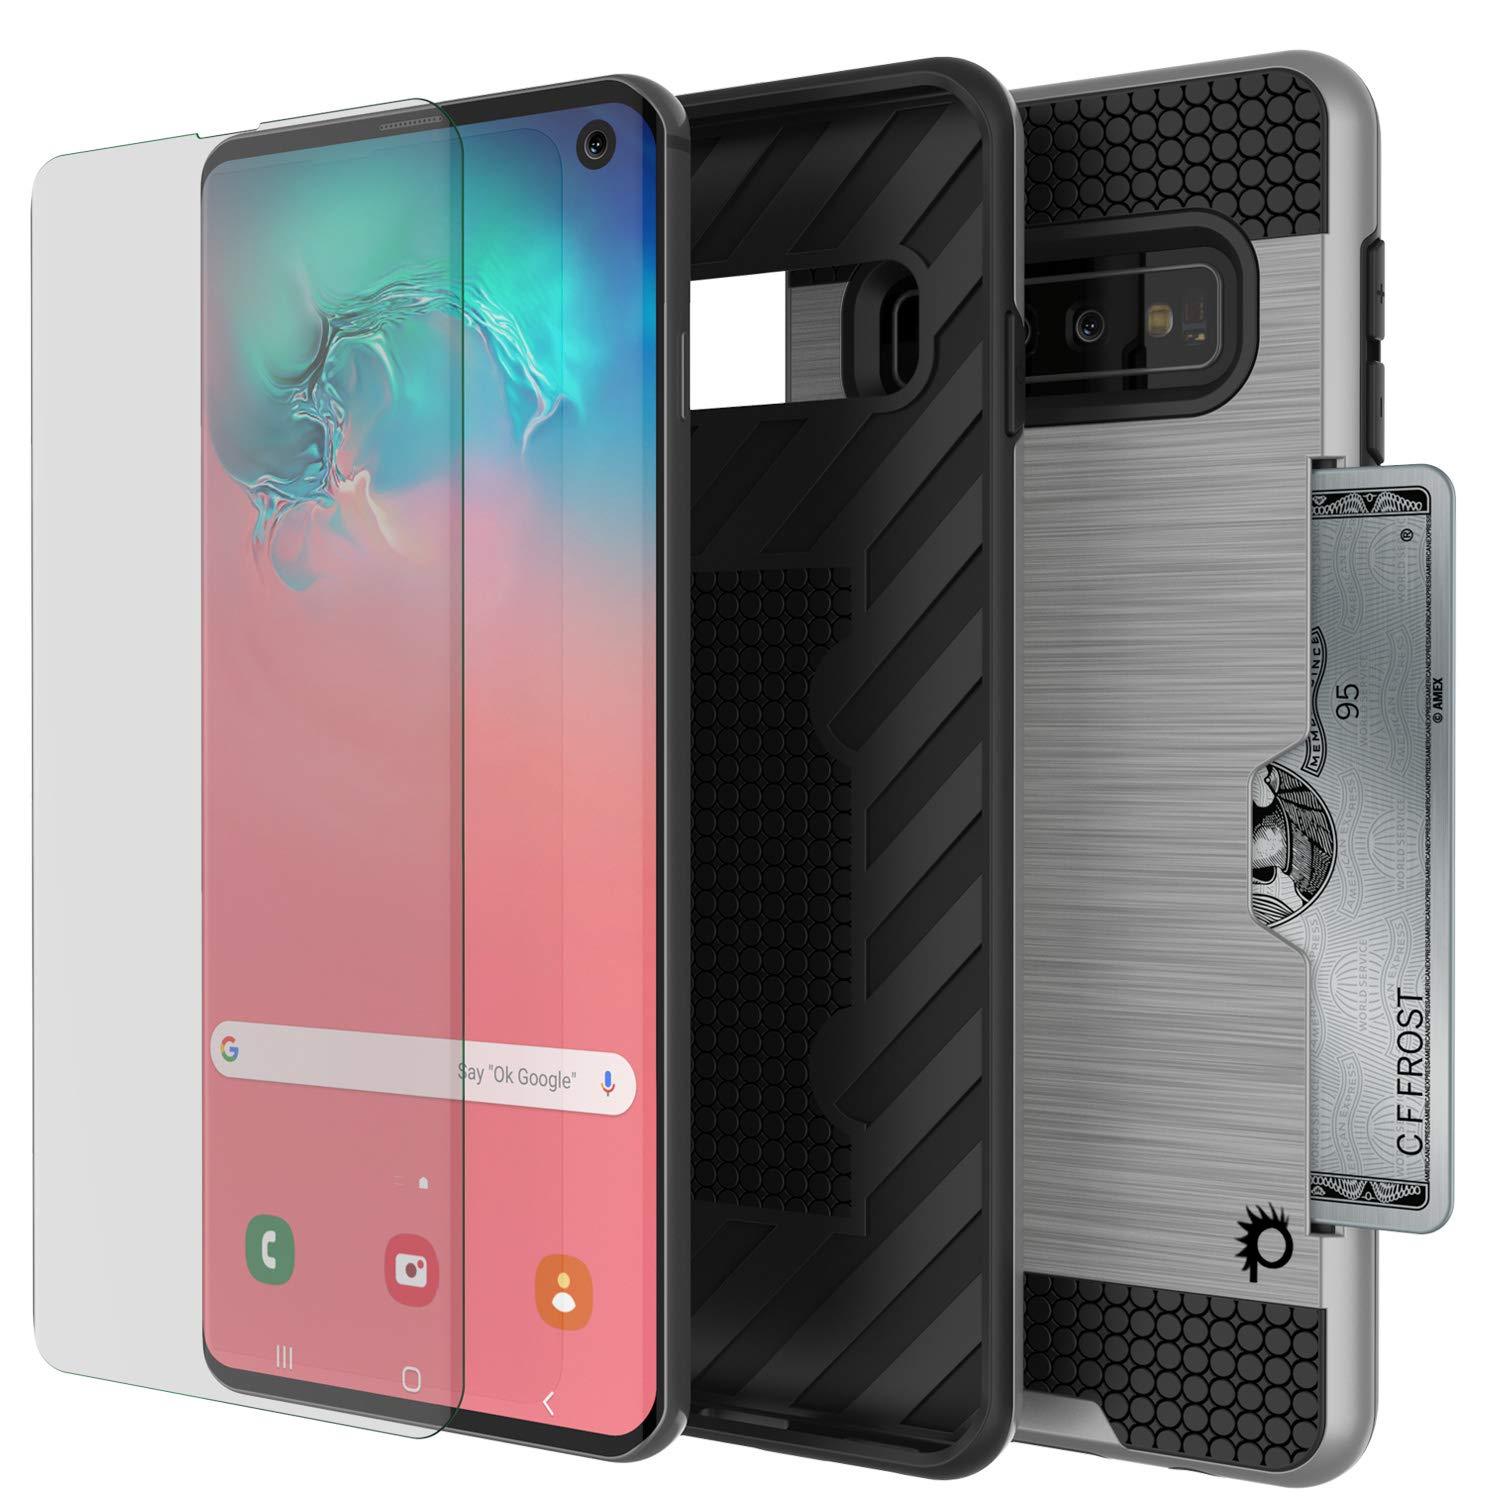 Galaxy S10e Case, PUNKcase [SLOT Series] [Slim Fit] Dual-Layer Armor Cover w/Integrated Anti-Shock System, Credit Card Slot [Silver]